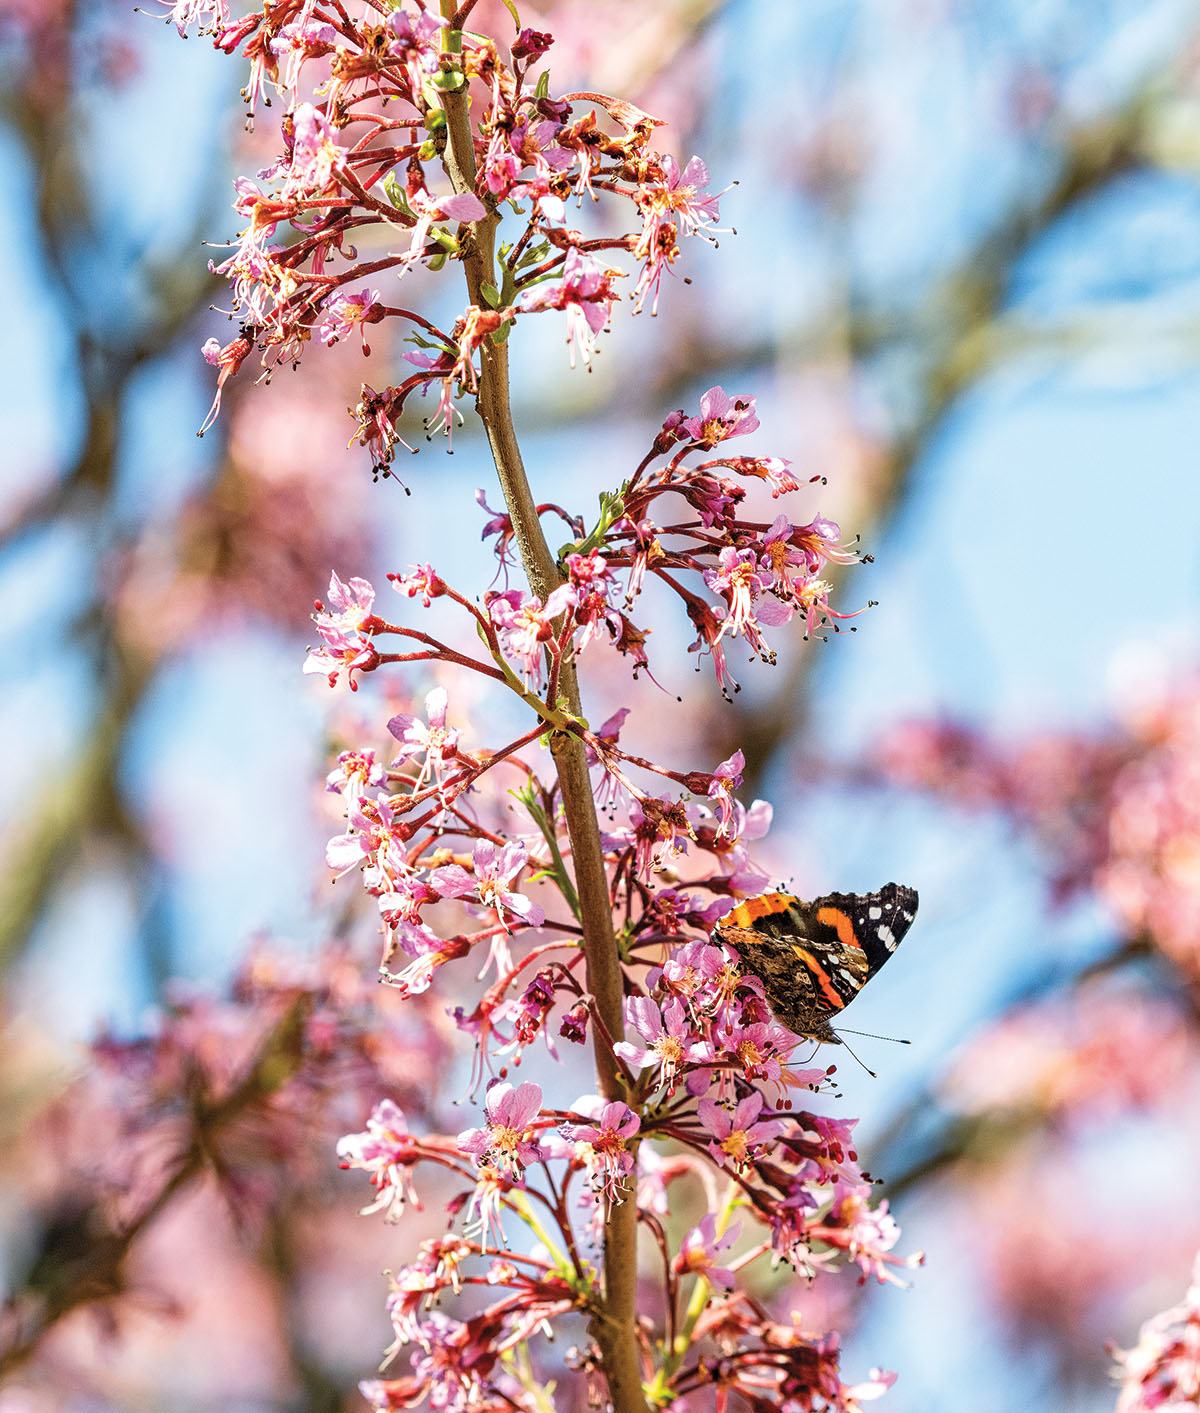 A butterfly lands on a delicate yet tall pink flower on a blue sky background